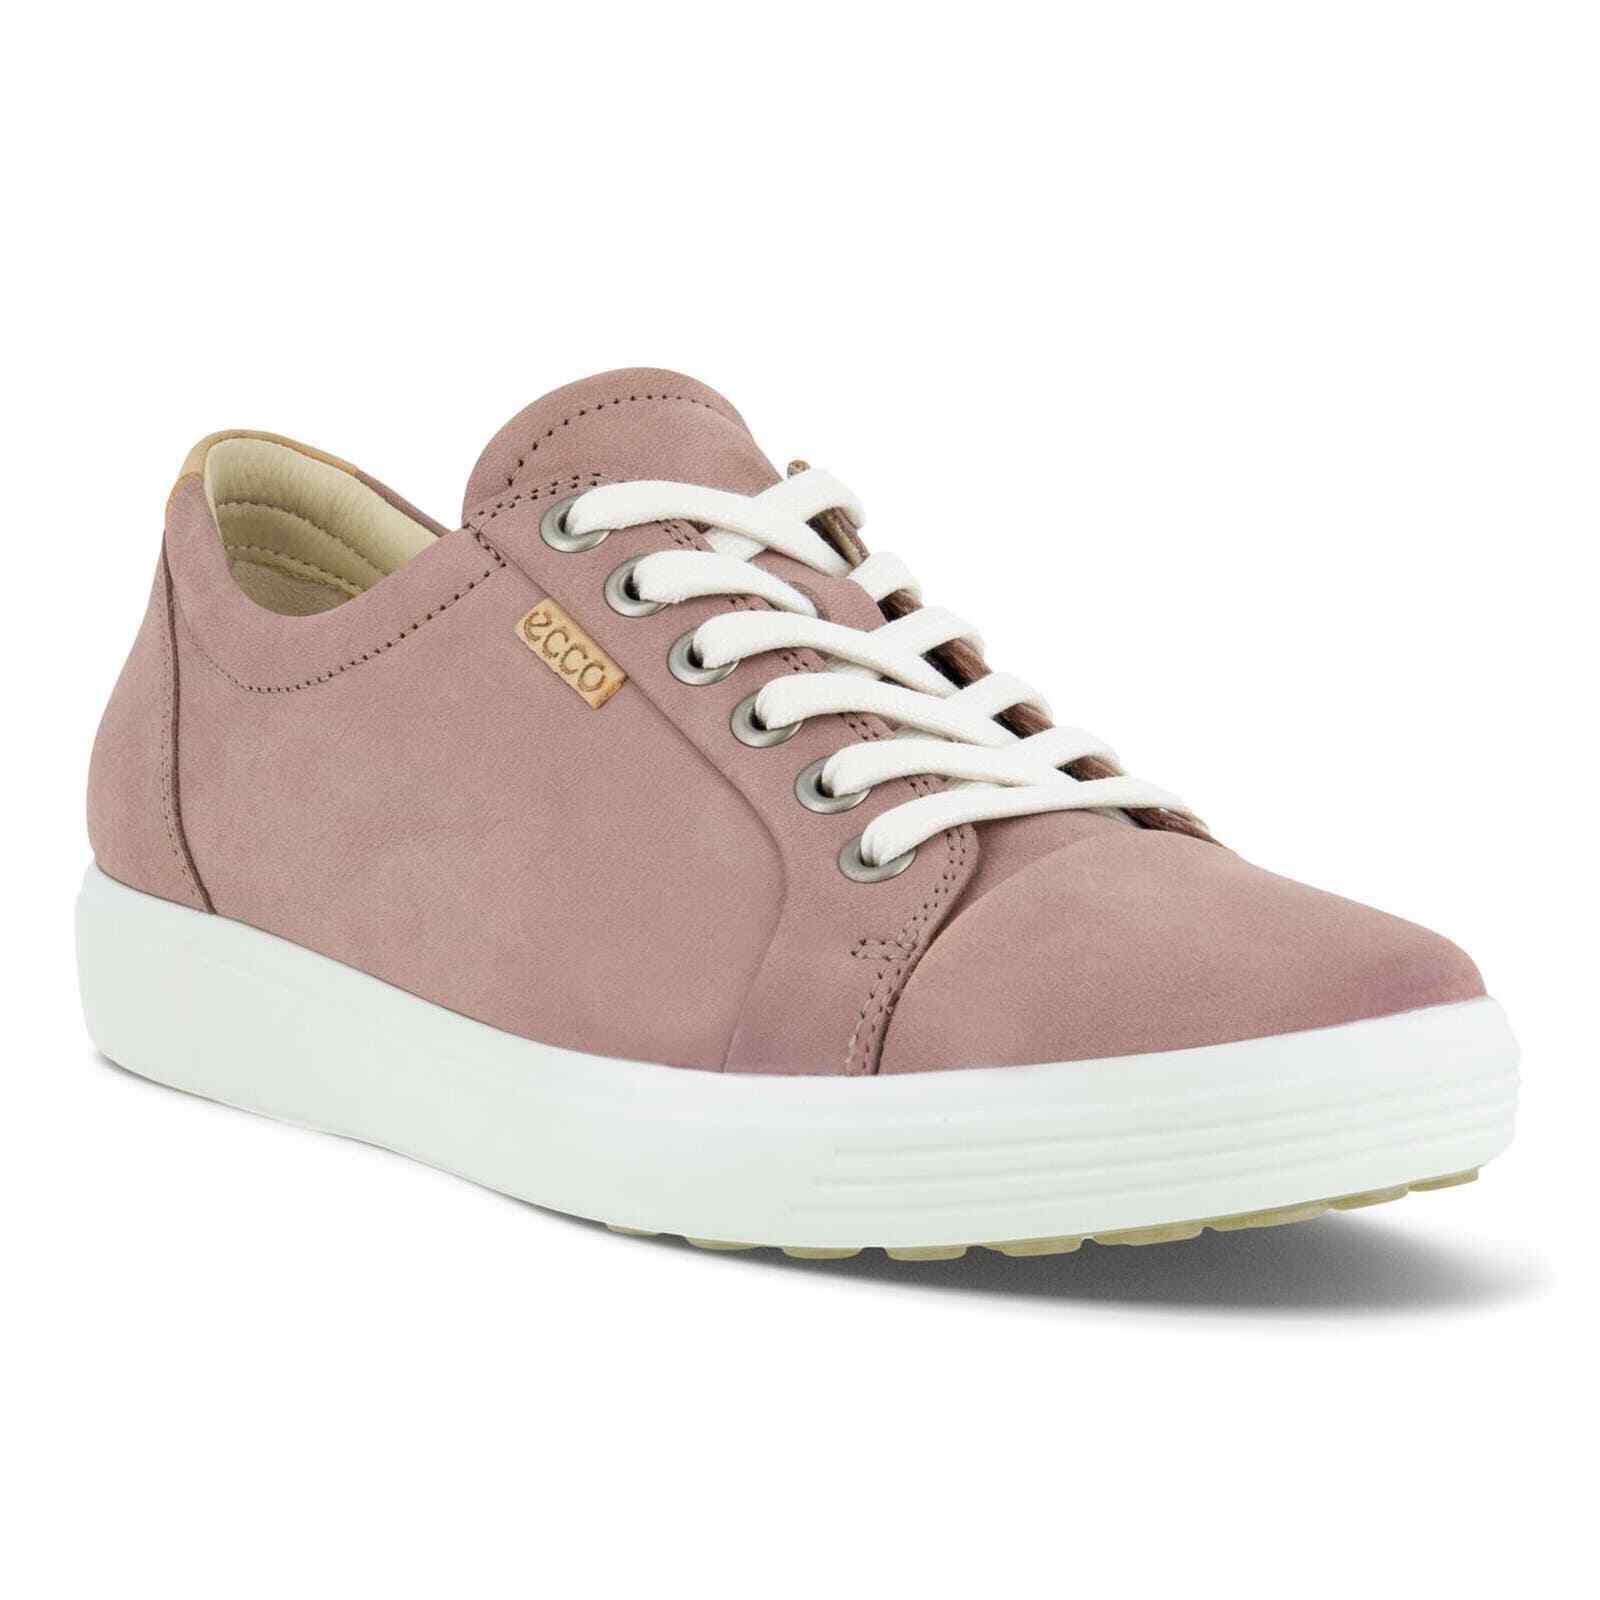 Primary image for Ecco Soft 7 Women Casual Lace Up Sneakers EU 36 US 5 Wood Rose Purplish Leather